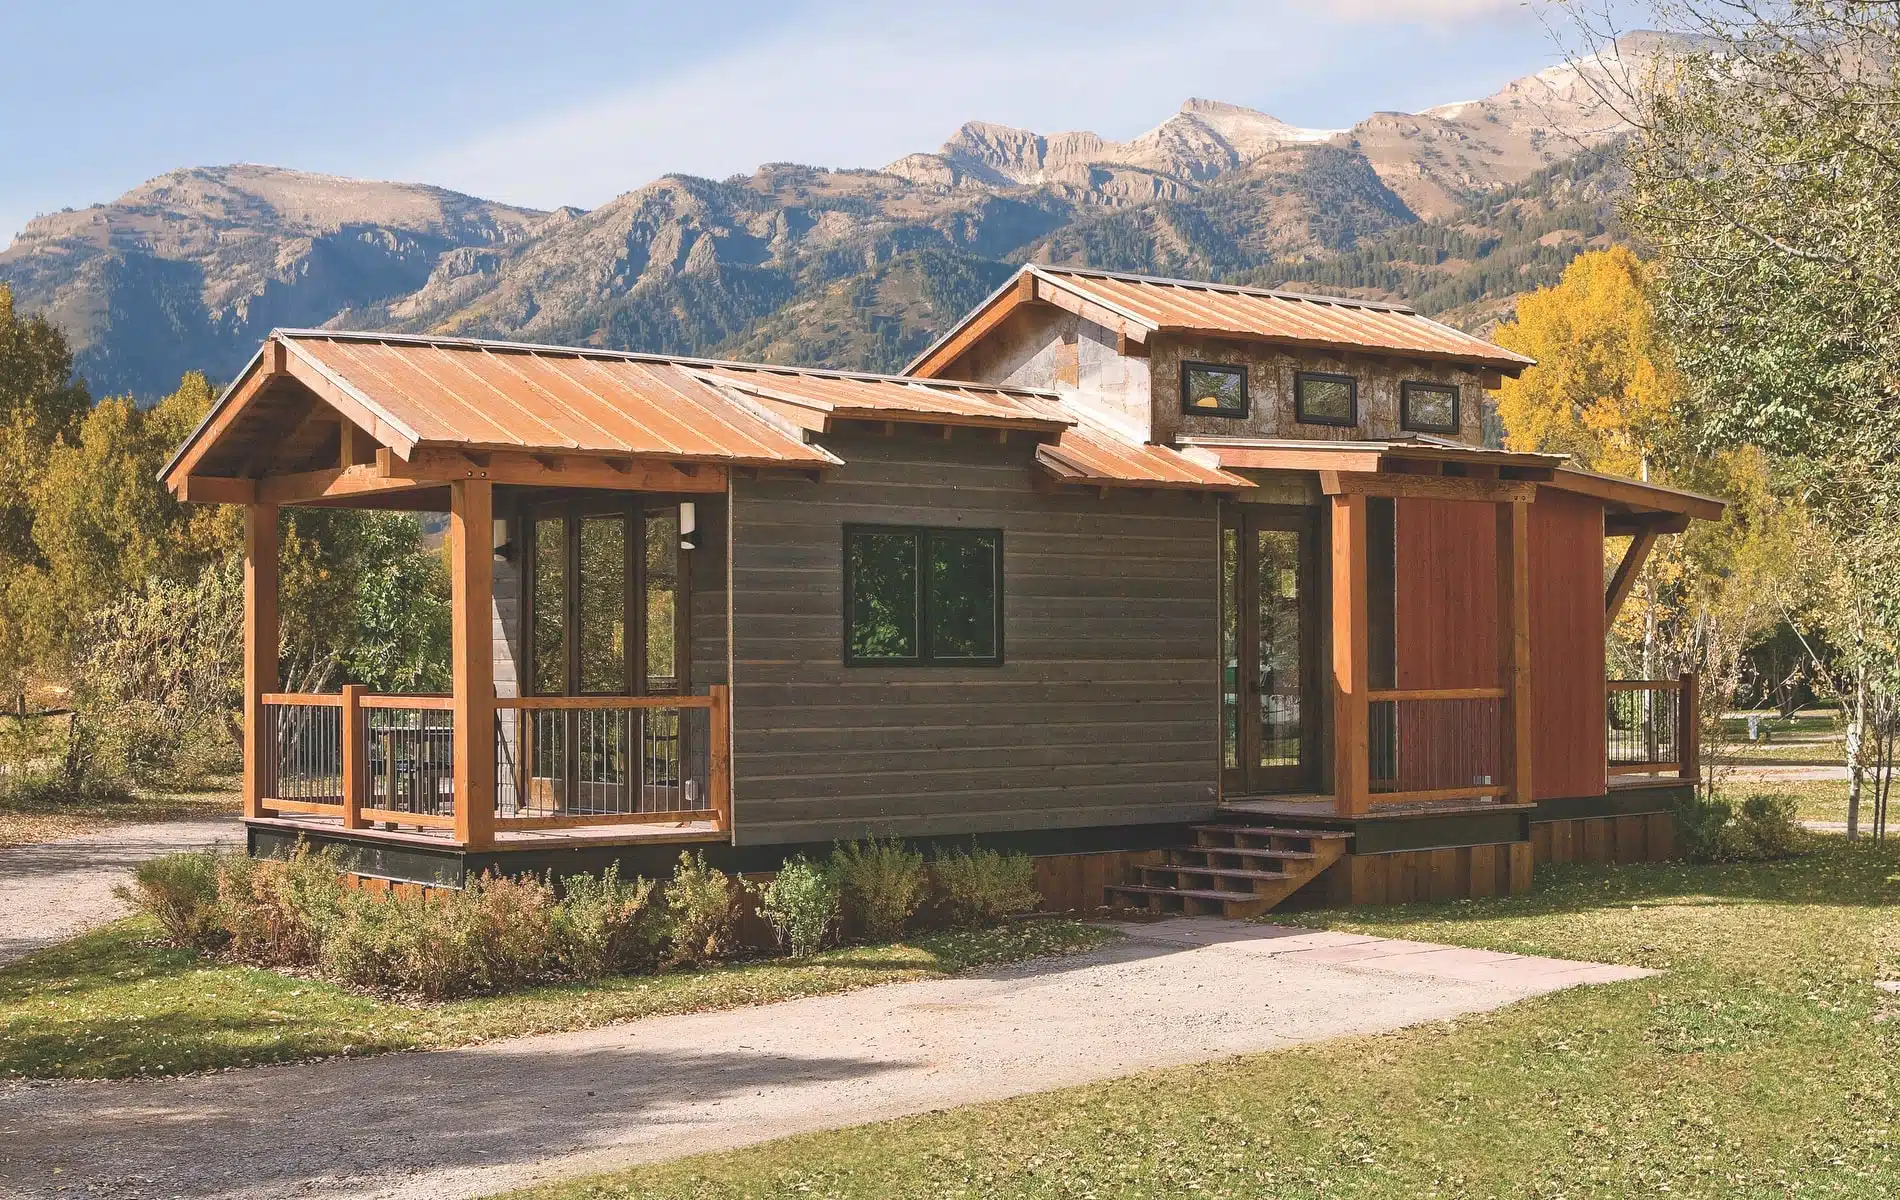 The Appeal of Tiny Homes